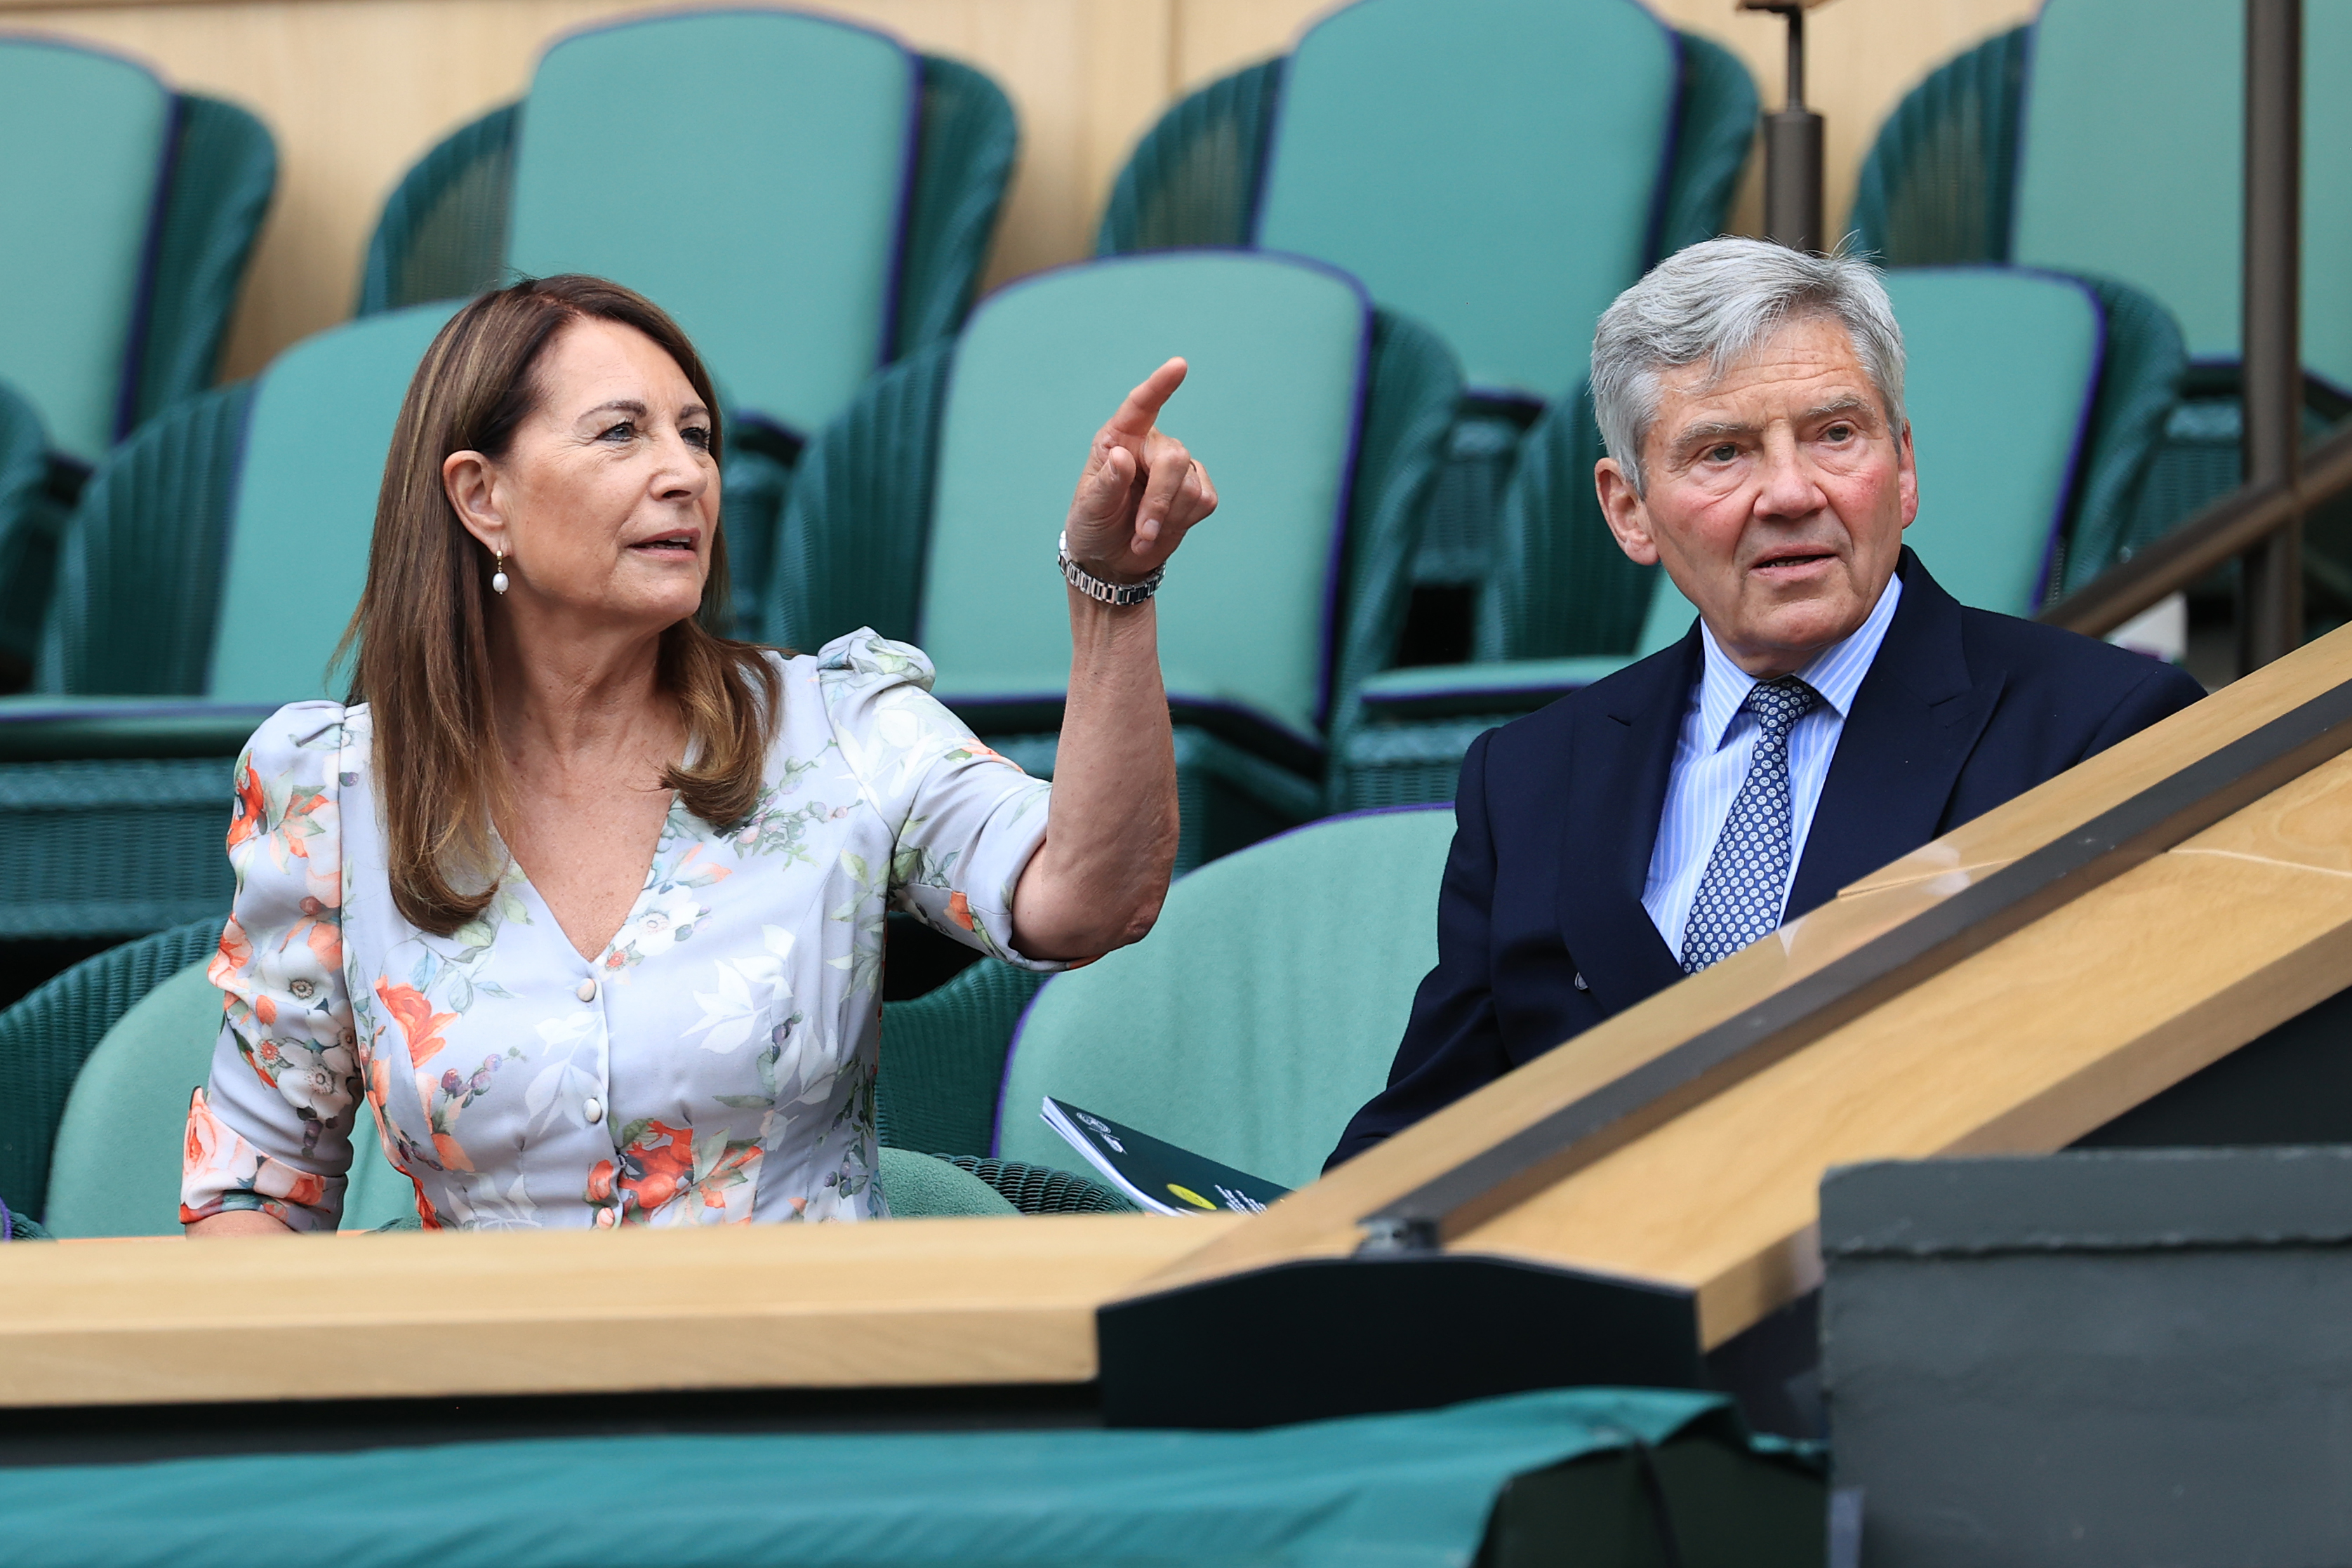 Carole and Michael Middleton during day nine of The Championships Wimbledon 2022 in London, England, on July 5, 2022. | Source: Getty Images